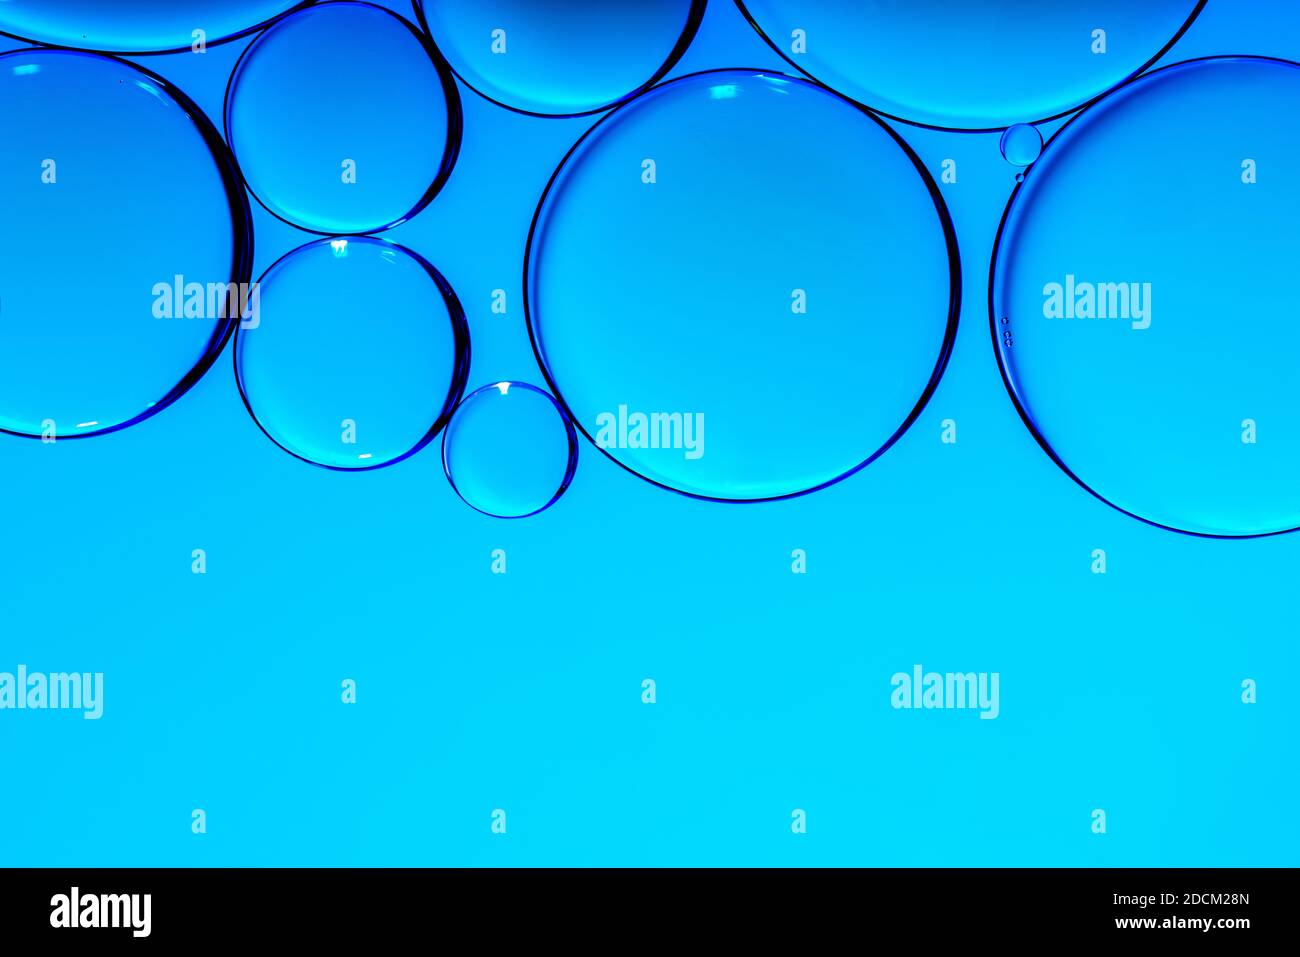 Blue oil drops in water. Bubbles of different sizes on blue abstract background Stock Photo